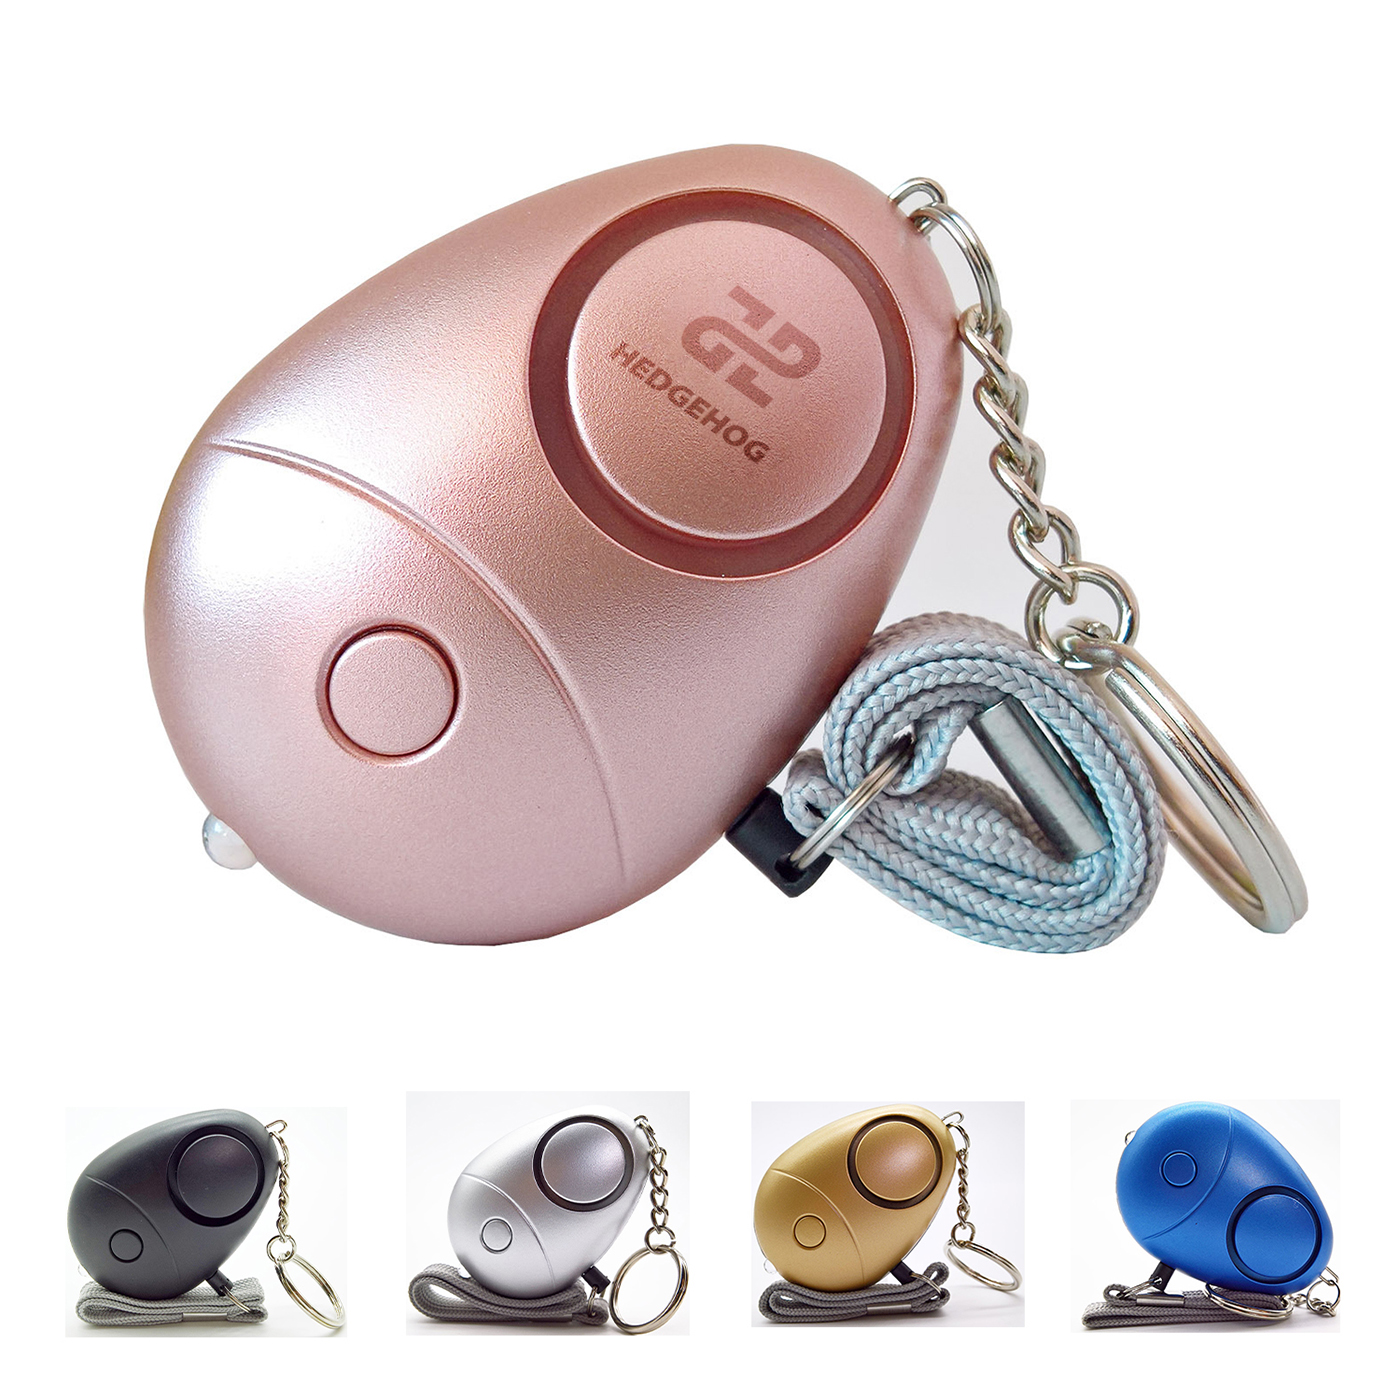 Personal Security Alarm Keychain With LED Light